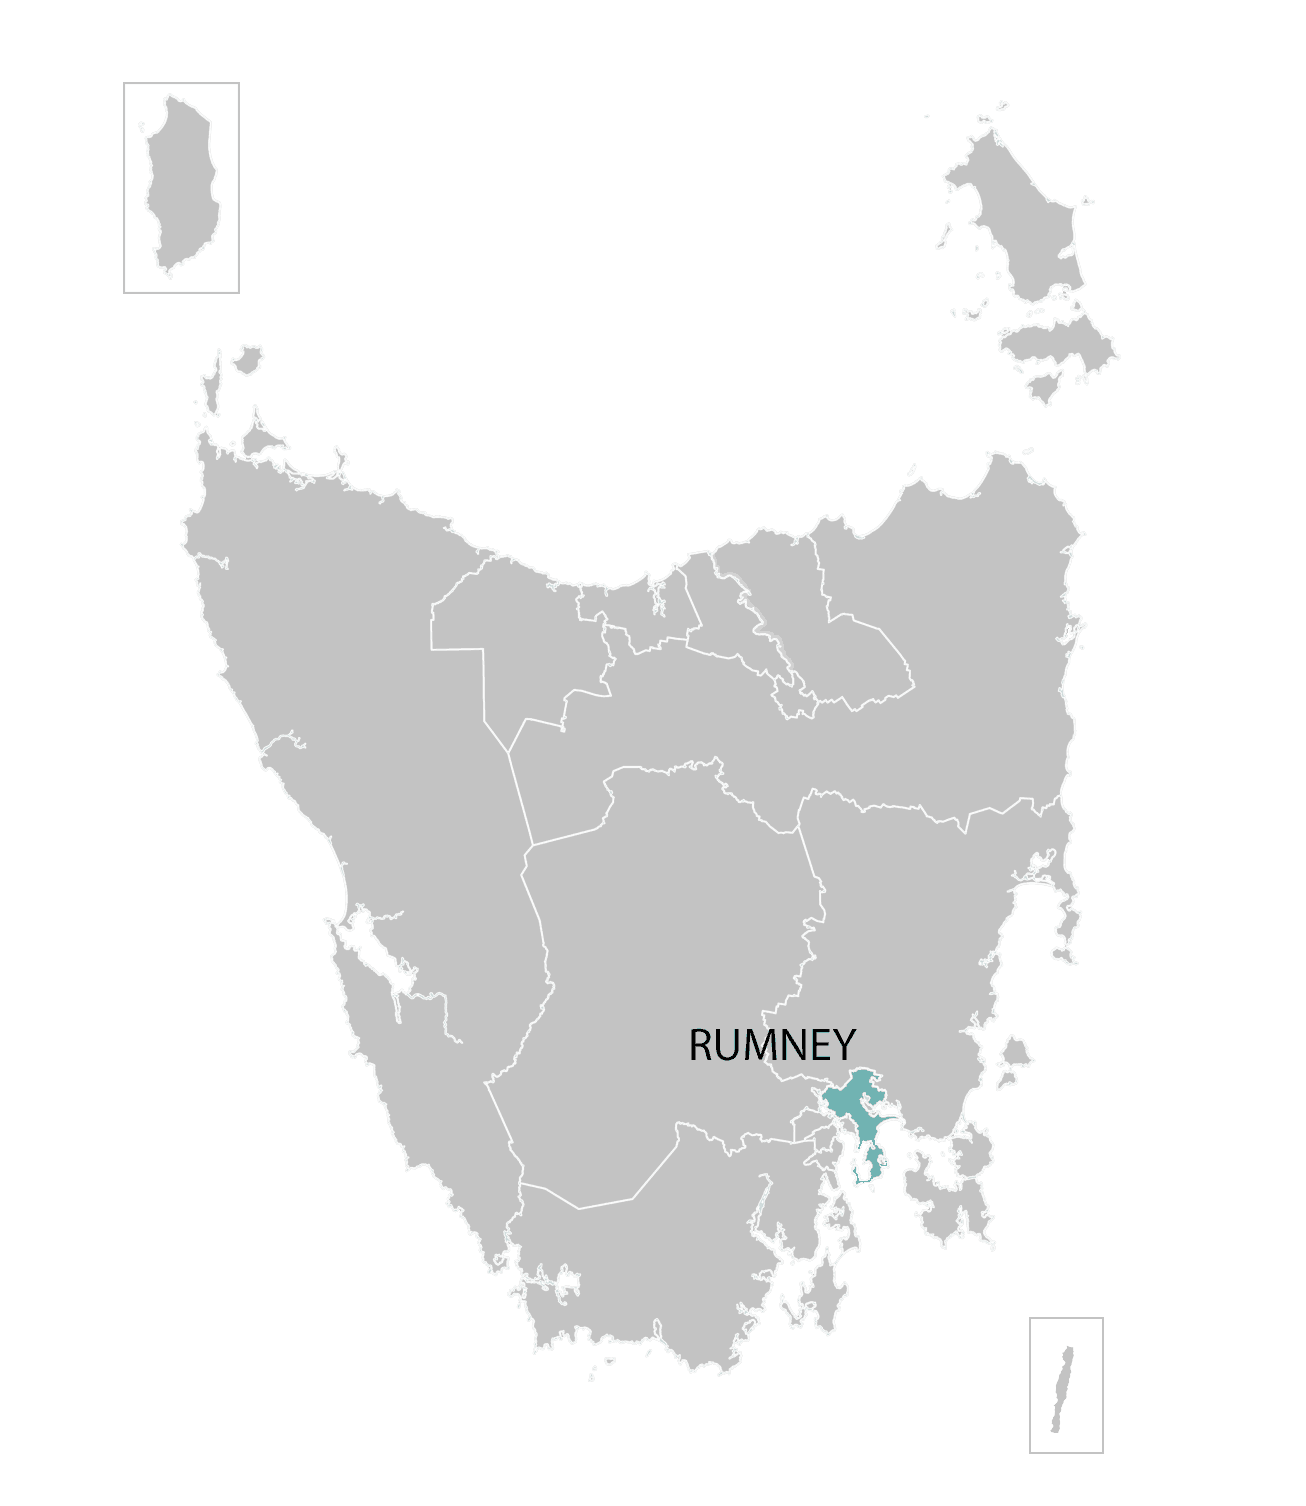 Rumney division highlighted on illustrated map of Tasmania